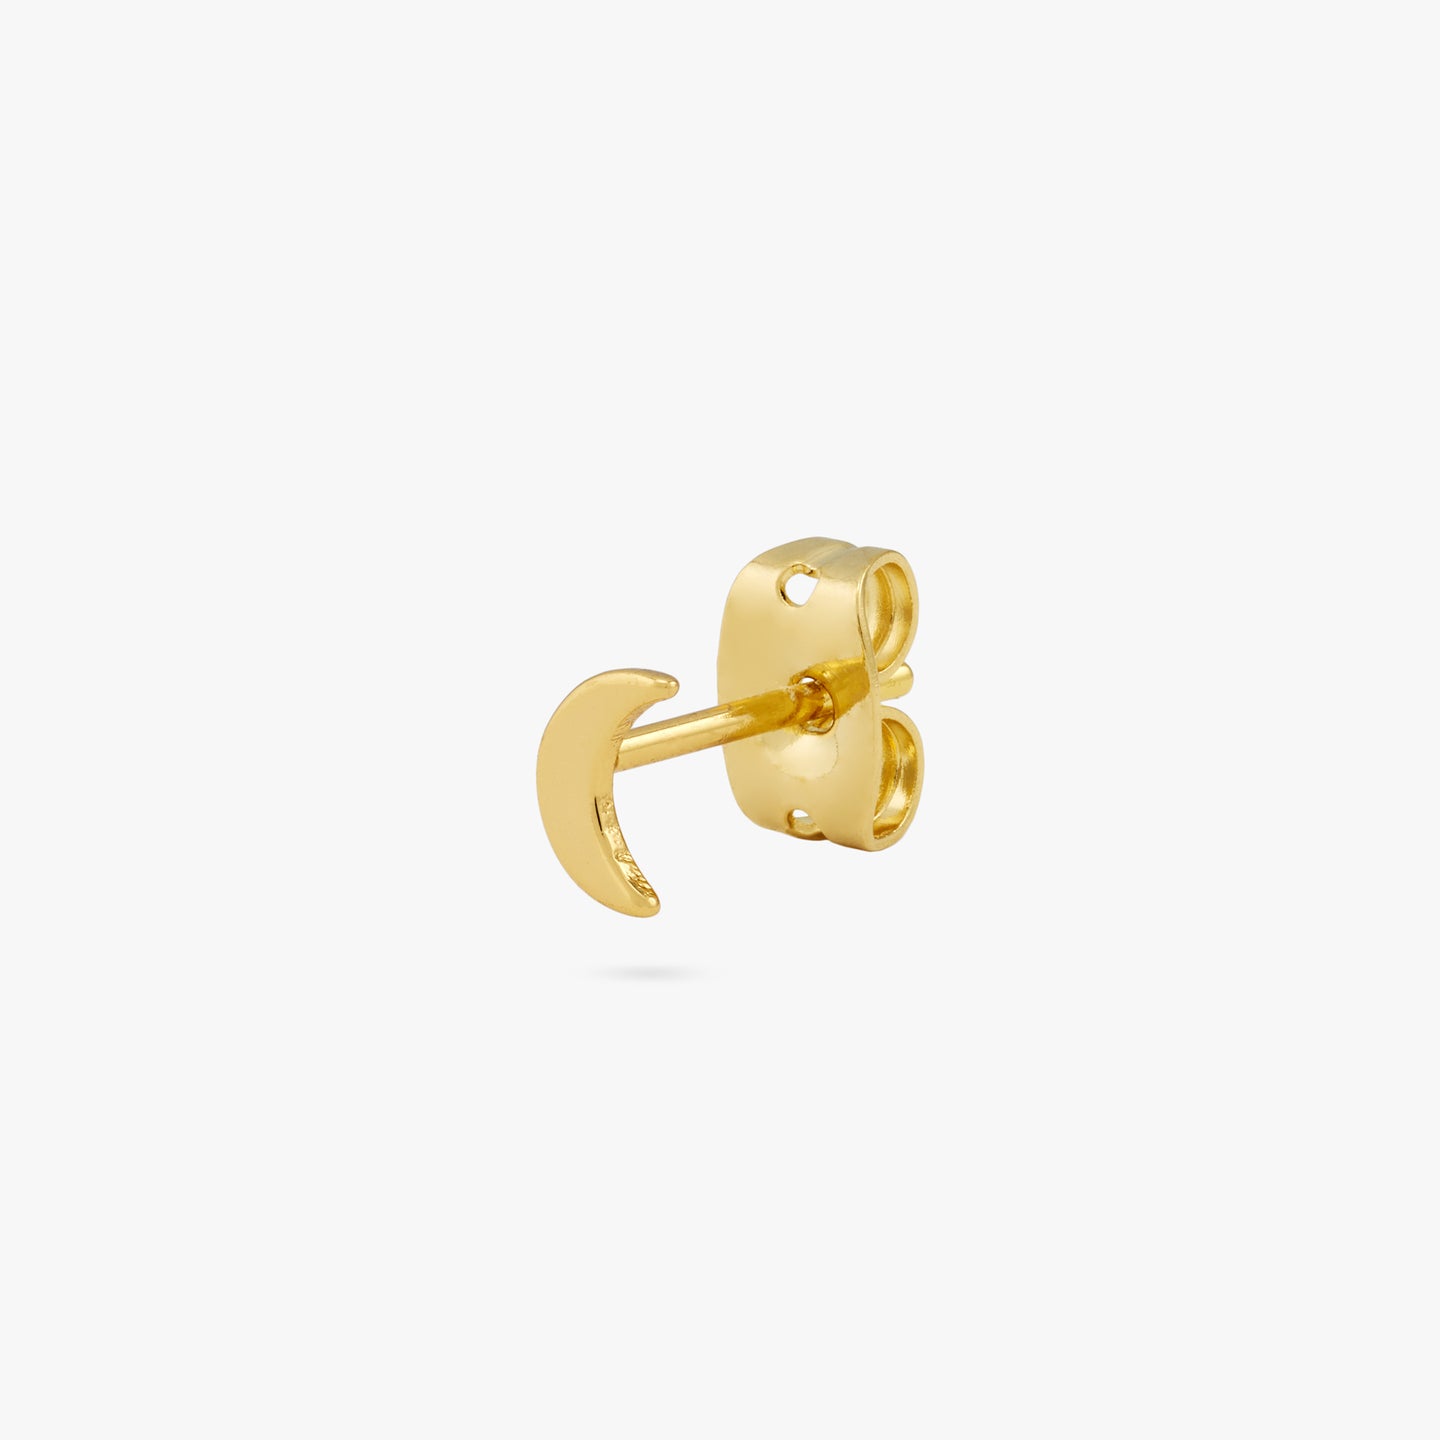 A gold small moon shaped stud color:null|gold